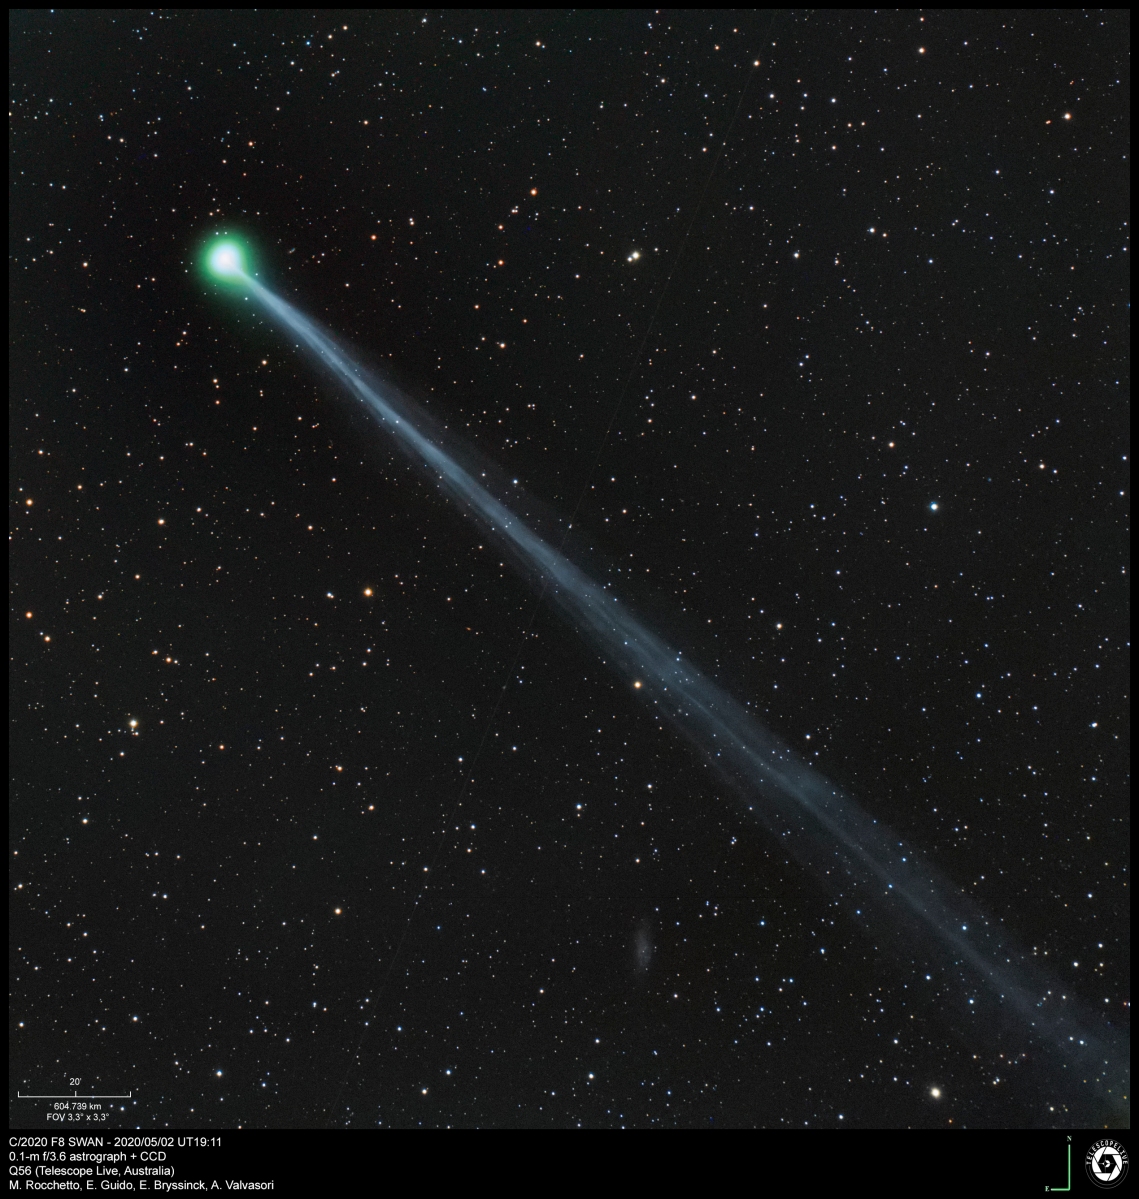 A Naked Eye Outburst From Comet Swan